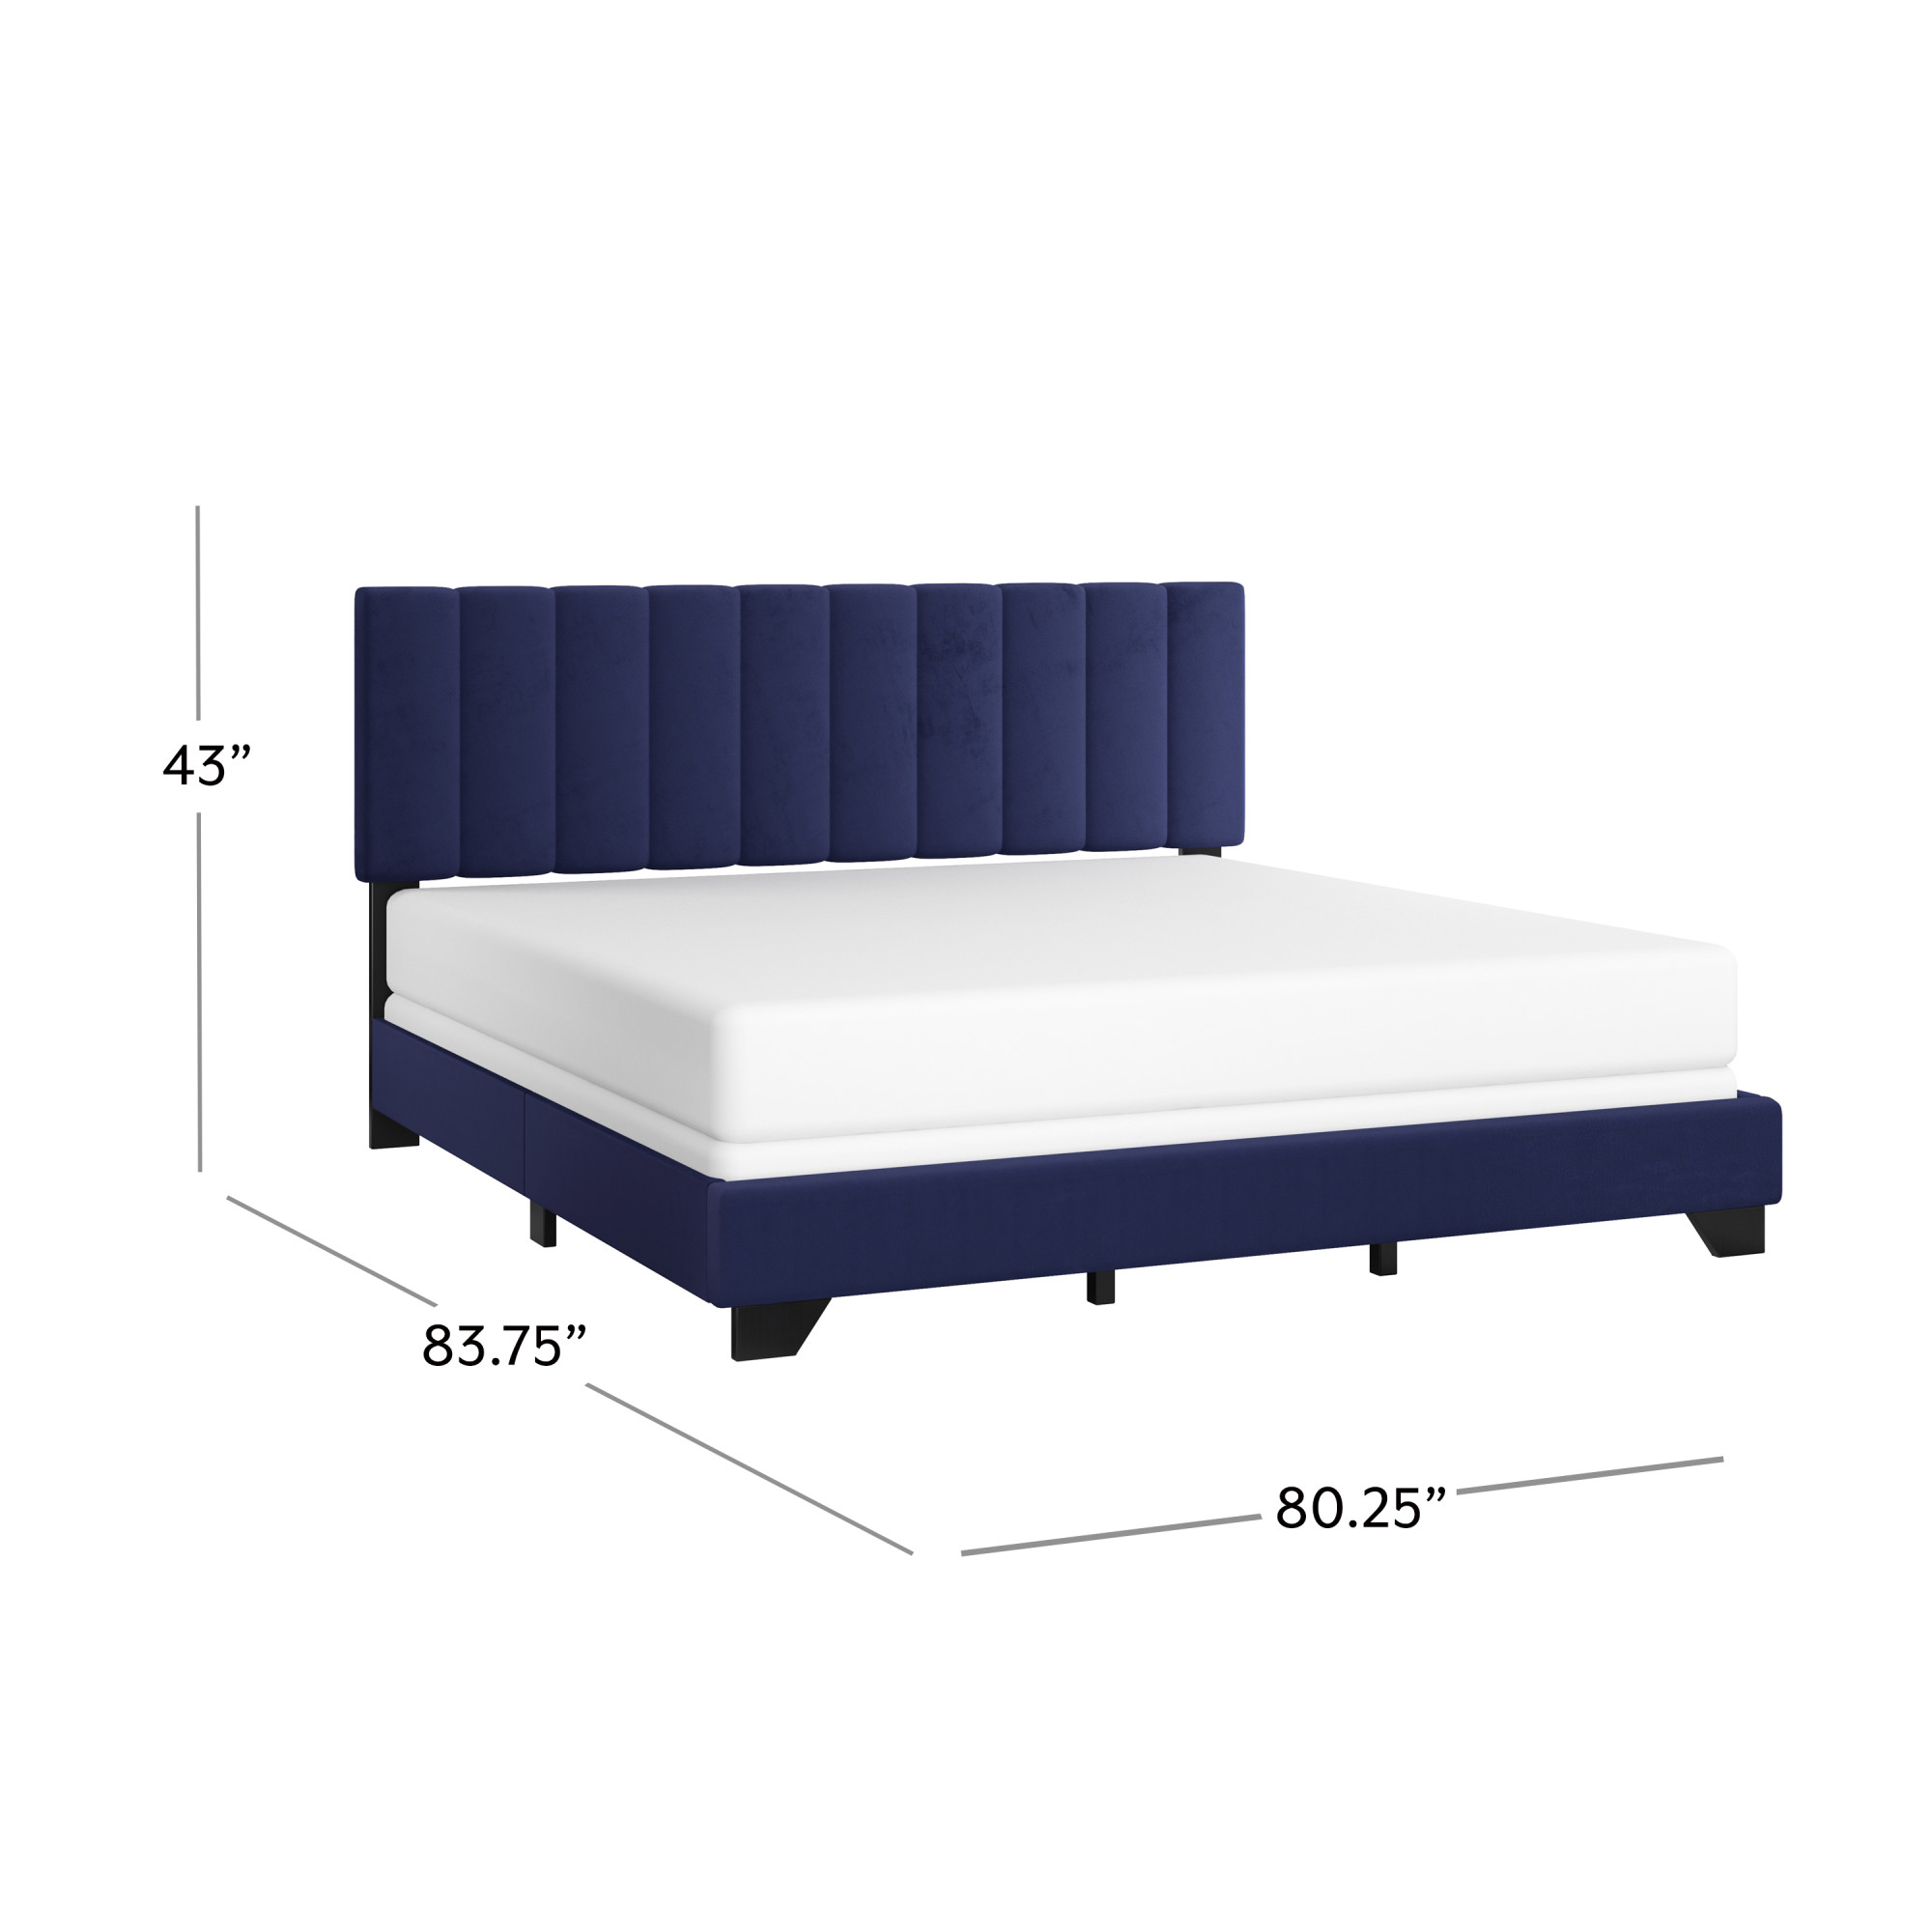 Reece Channel Stitched Upholstered King Bed, Sapphire, by Hillsdale Living Essentials - image 4 of 17